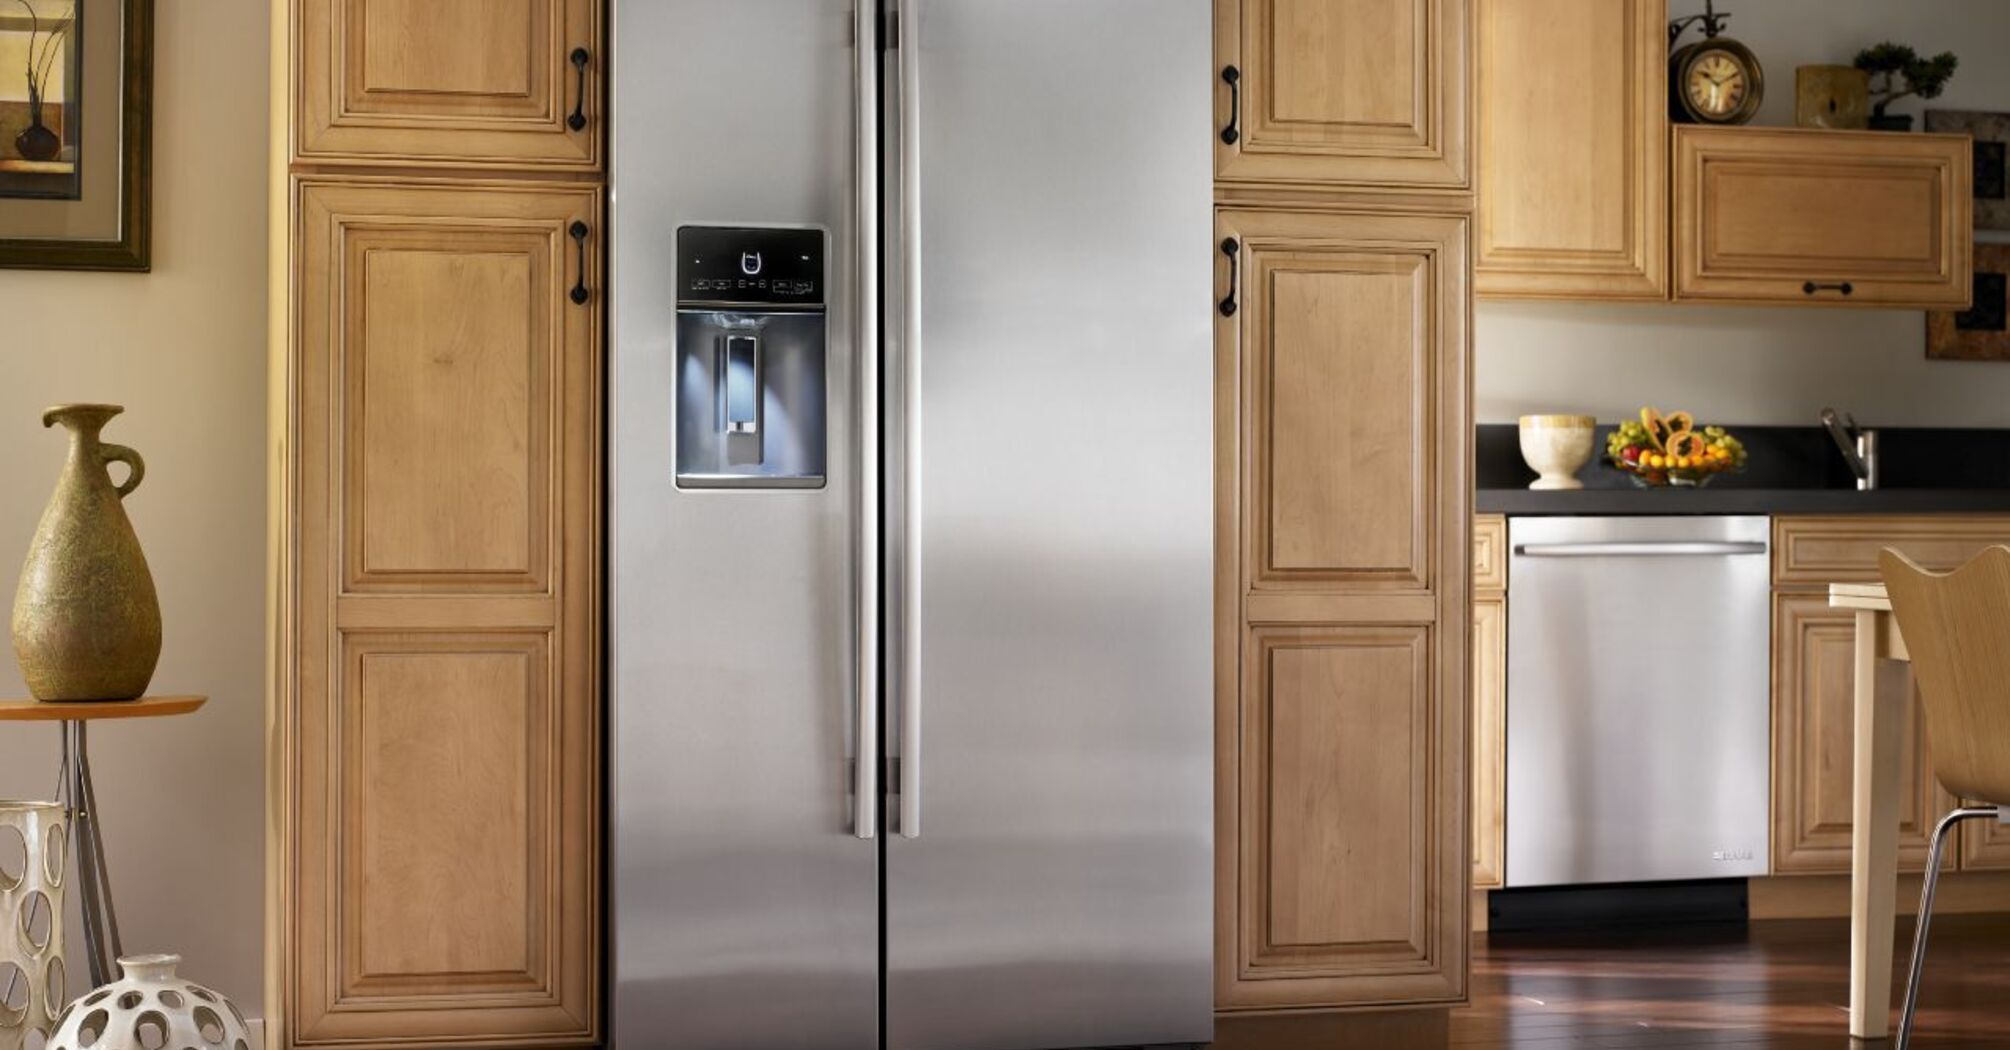 Comparison of built-in and conventional refrigerators